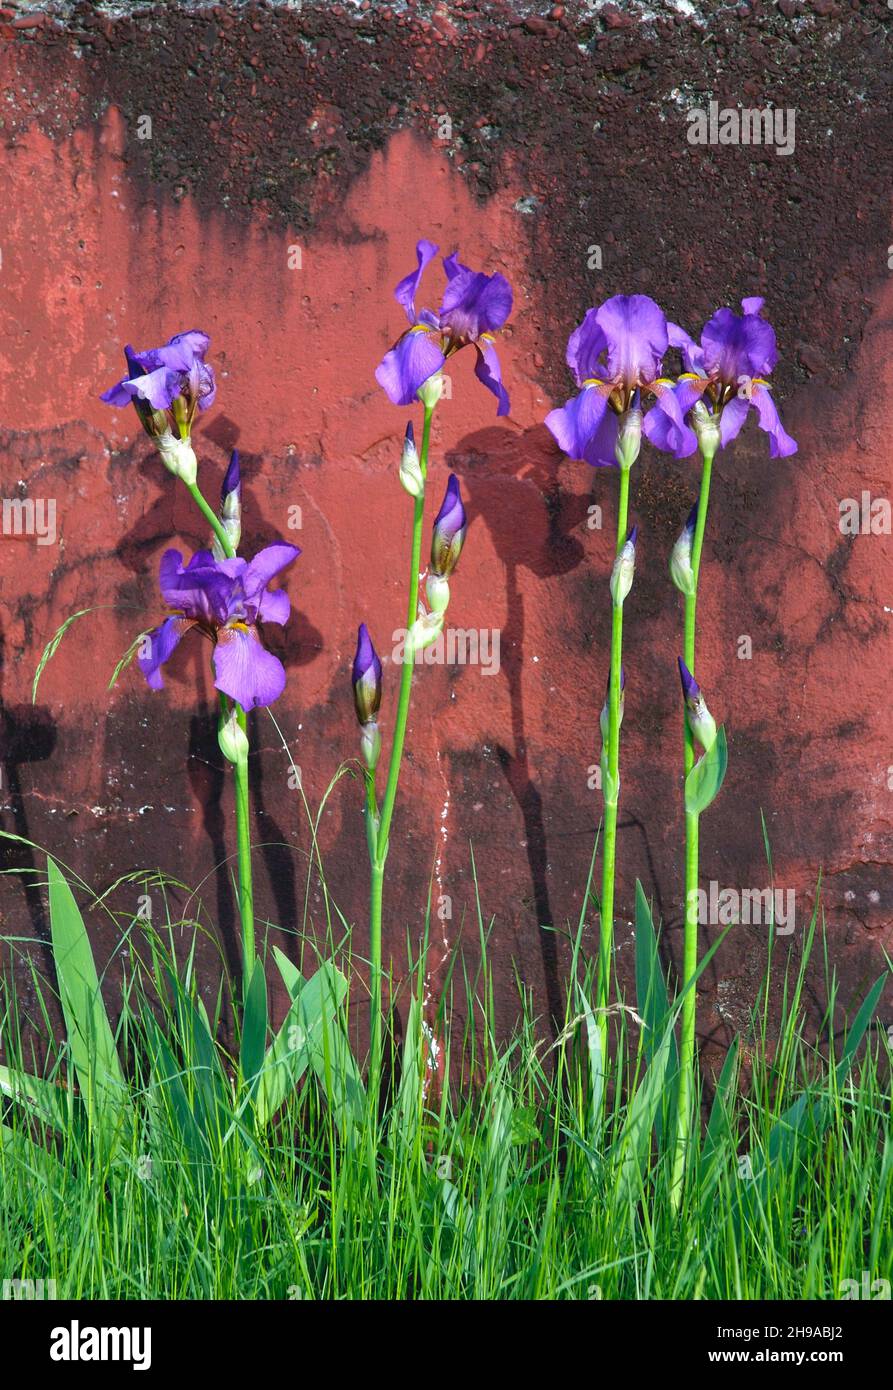 Wild iris flowers against rust colored wall. Oregon Stock Photo